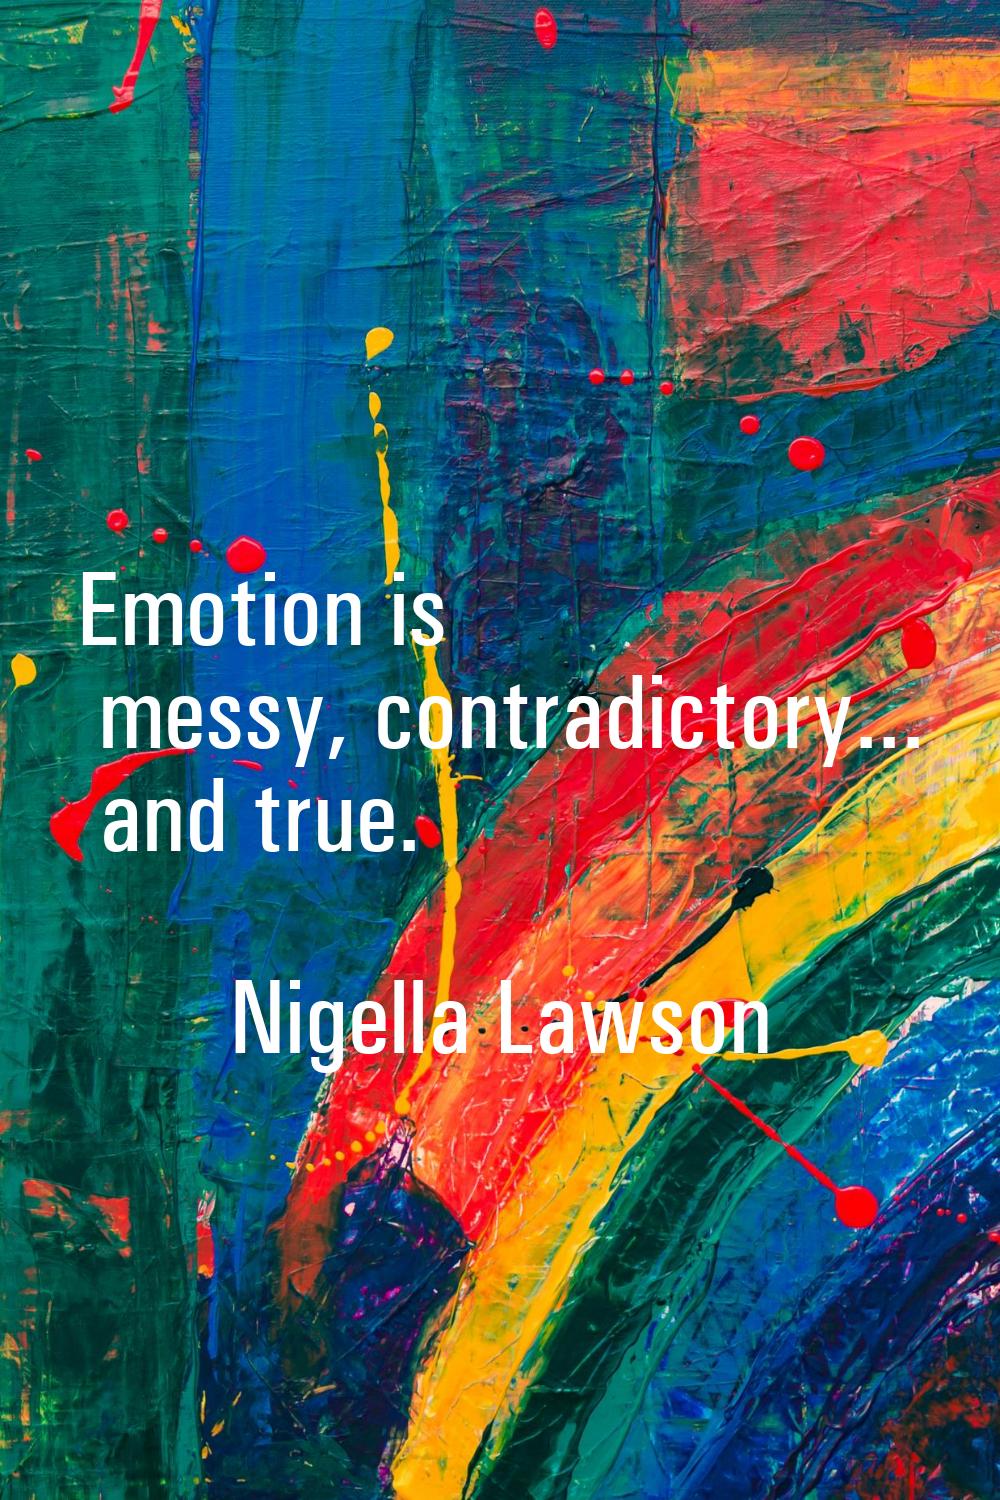 Emotion is messy, contradictory... and true.